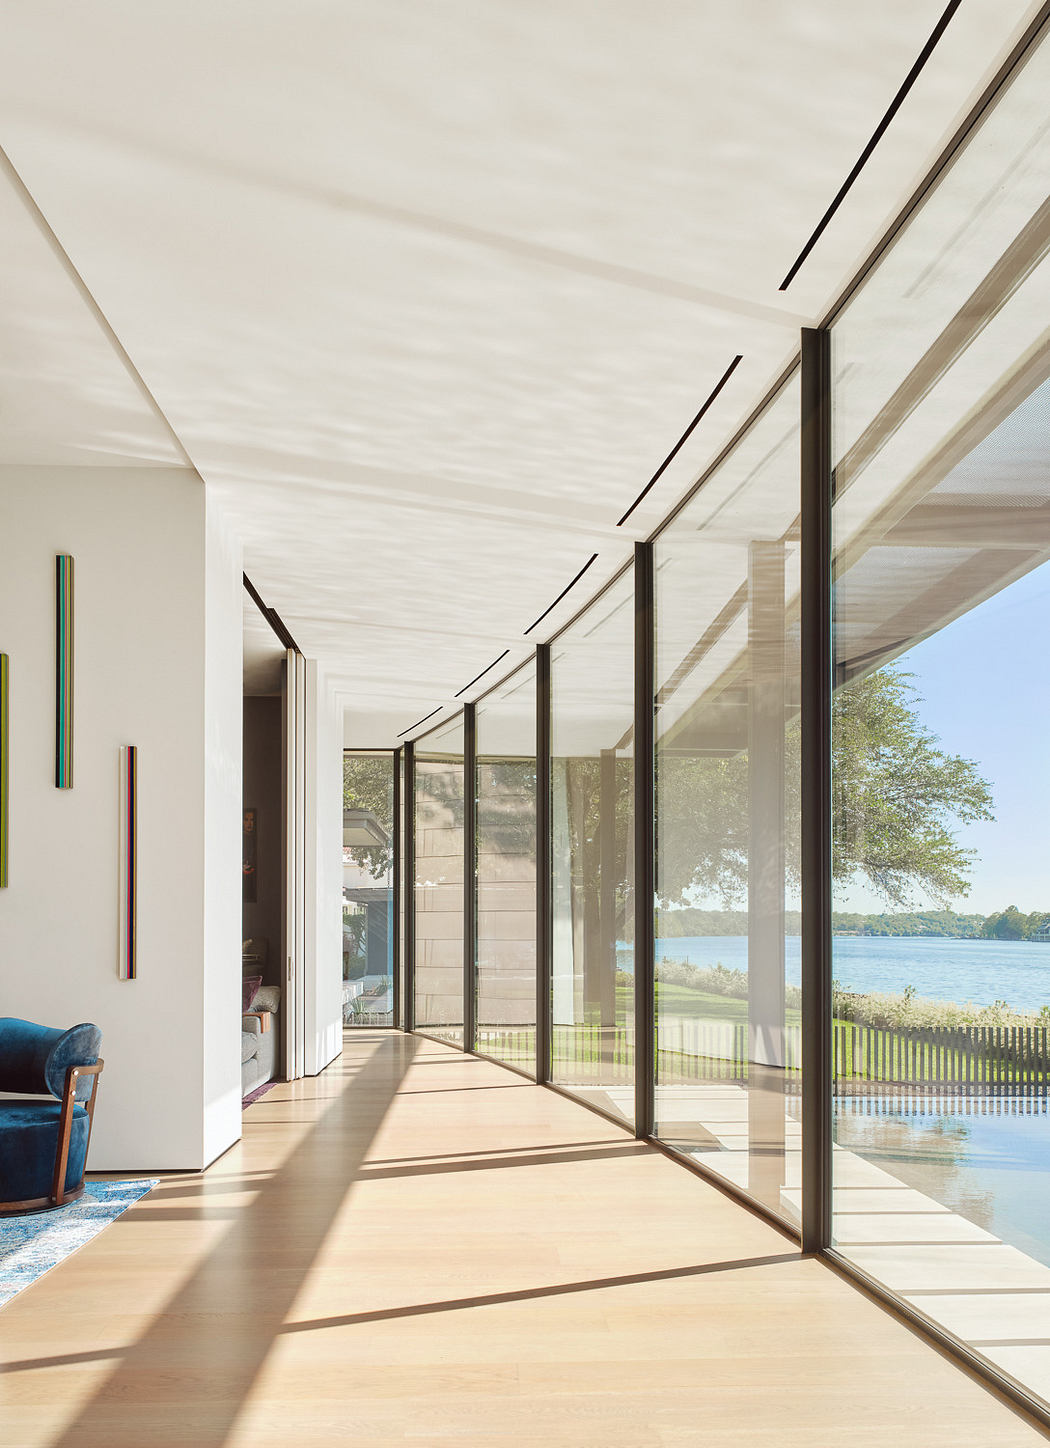 Modern corridor with floor-to-ceiling windows overlooking a lake.